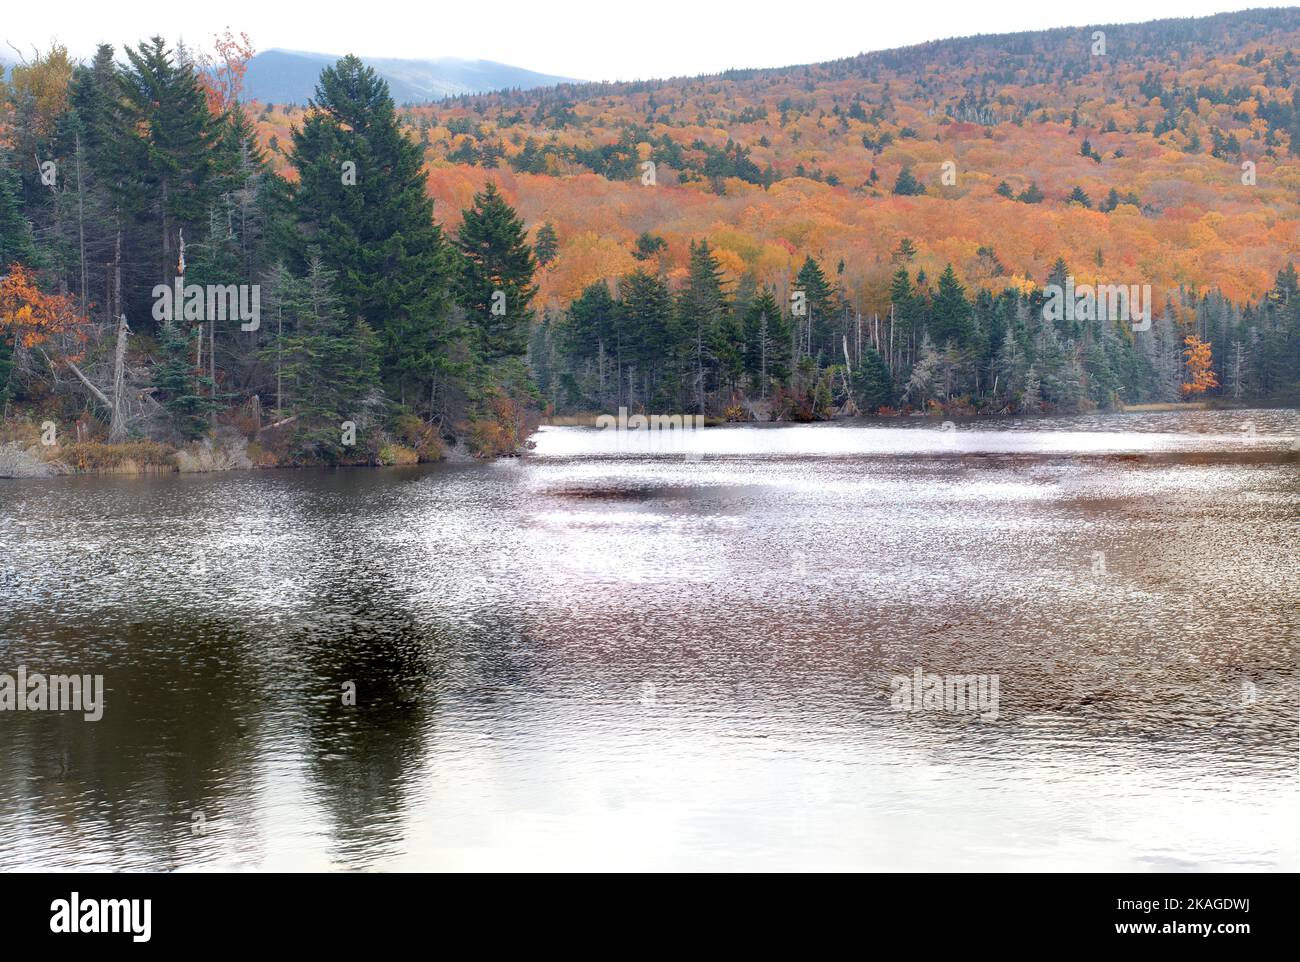 Autumn in White Mountains of New Hampshire. Ripples on surface of Long Pond, hillside of colorful fall foliage, and Mount Moosilauke in the clouds. Stock Photo